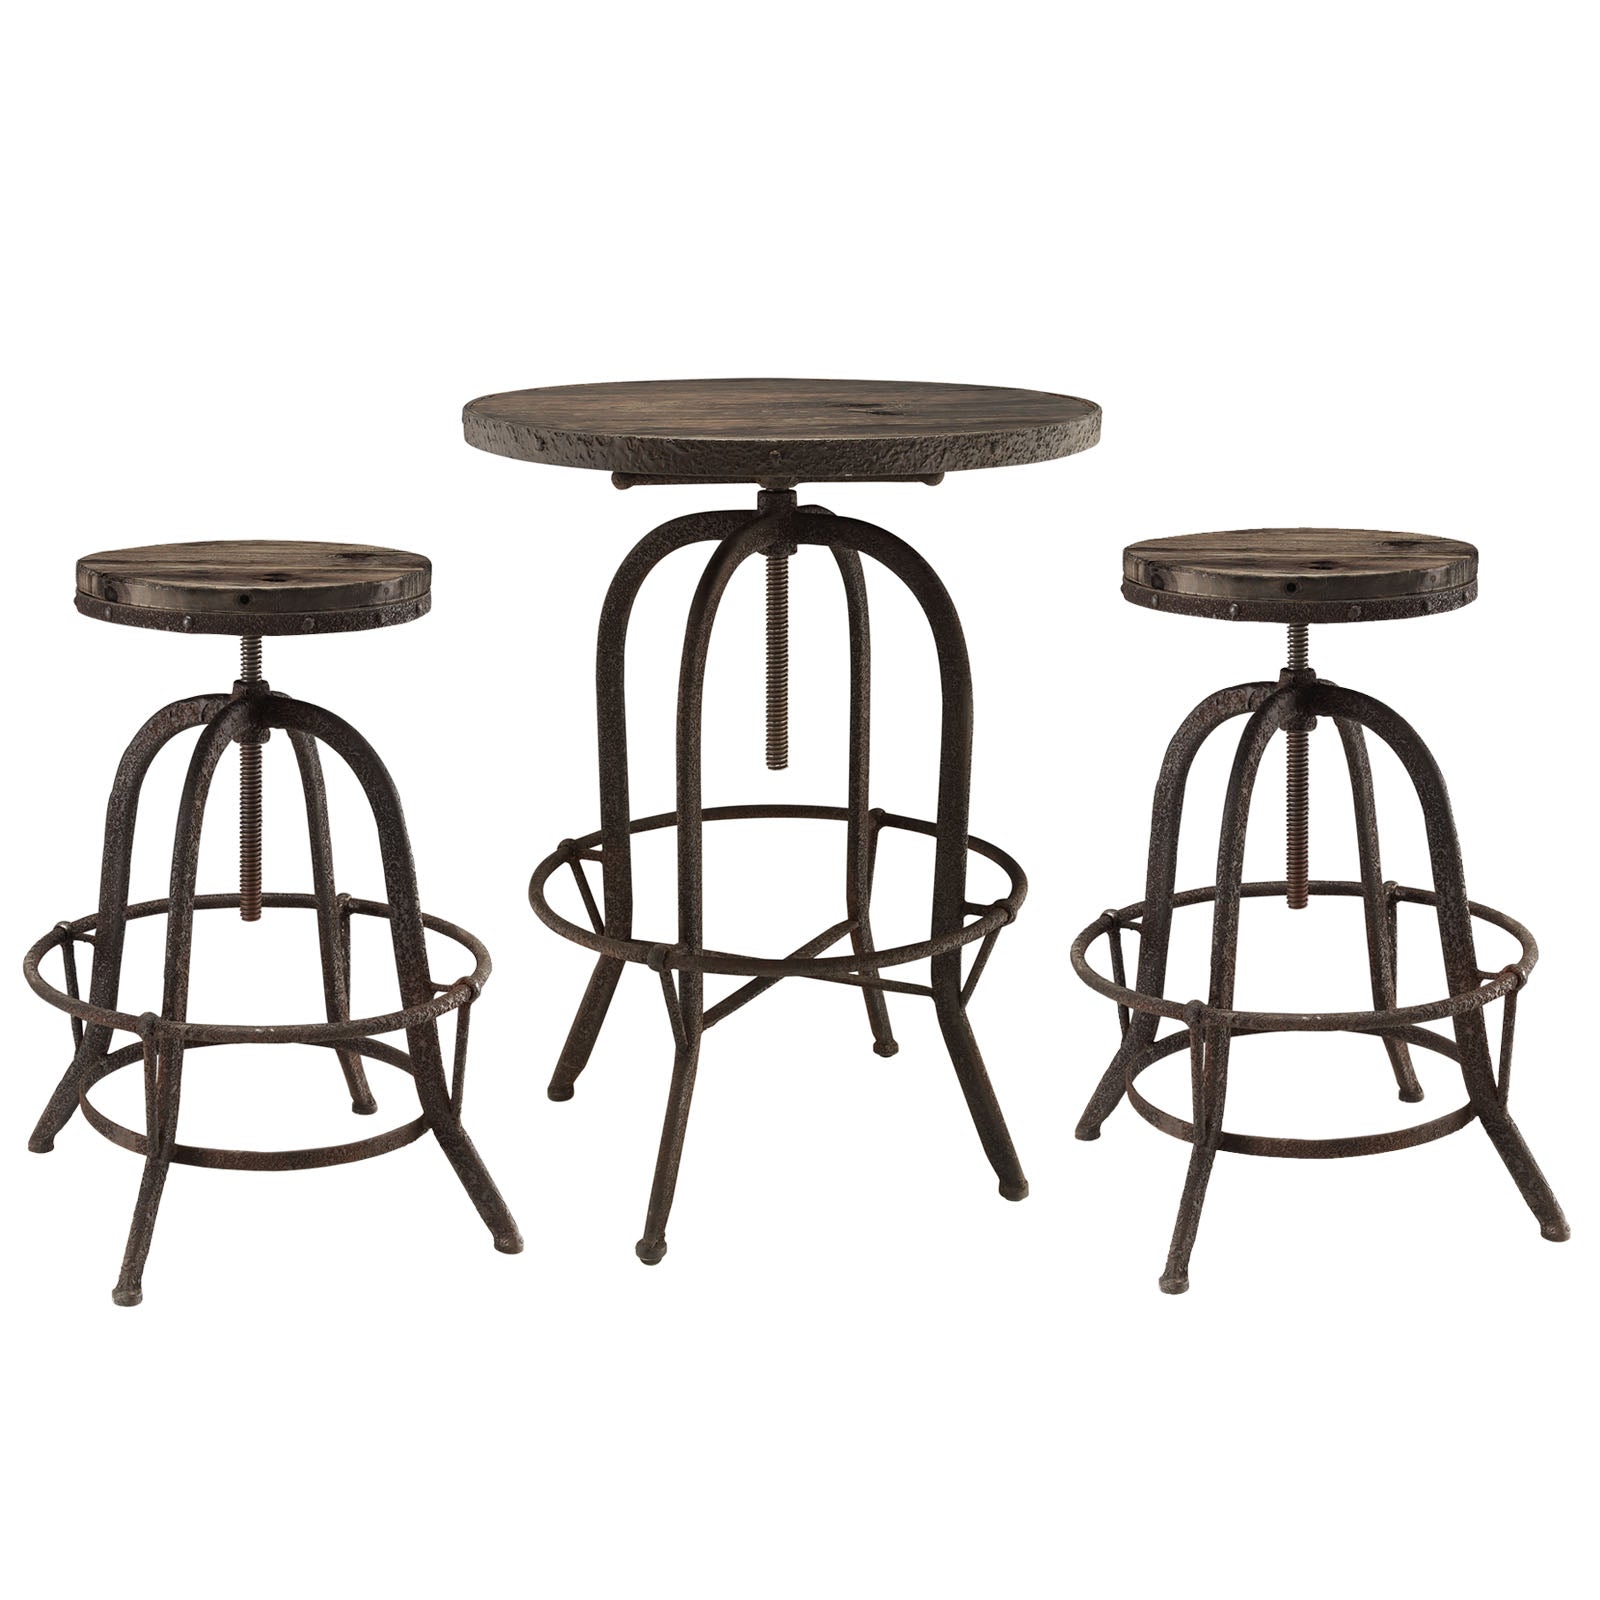 Gather 3 Piece Dining Set - East Shore Modern Home Furnishings